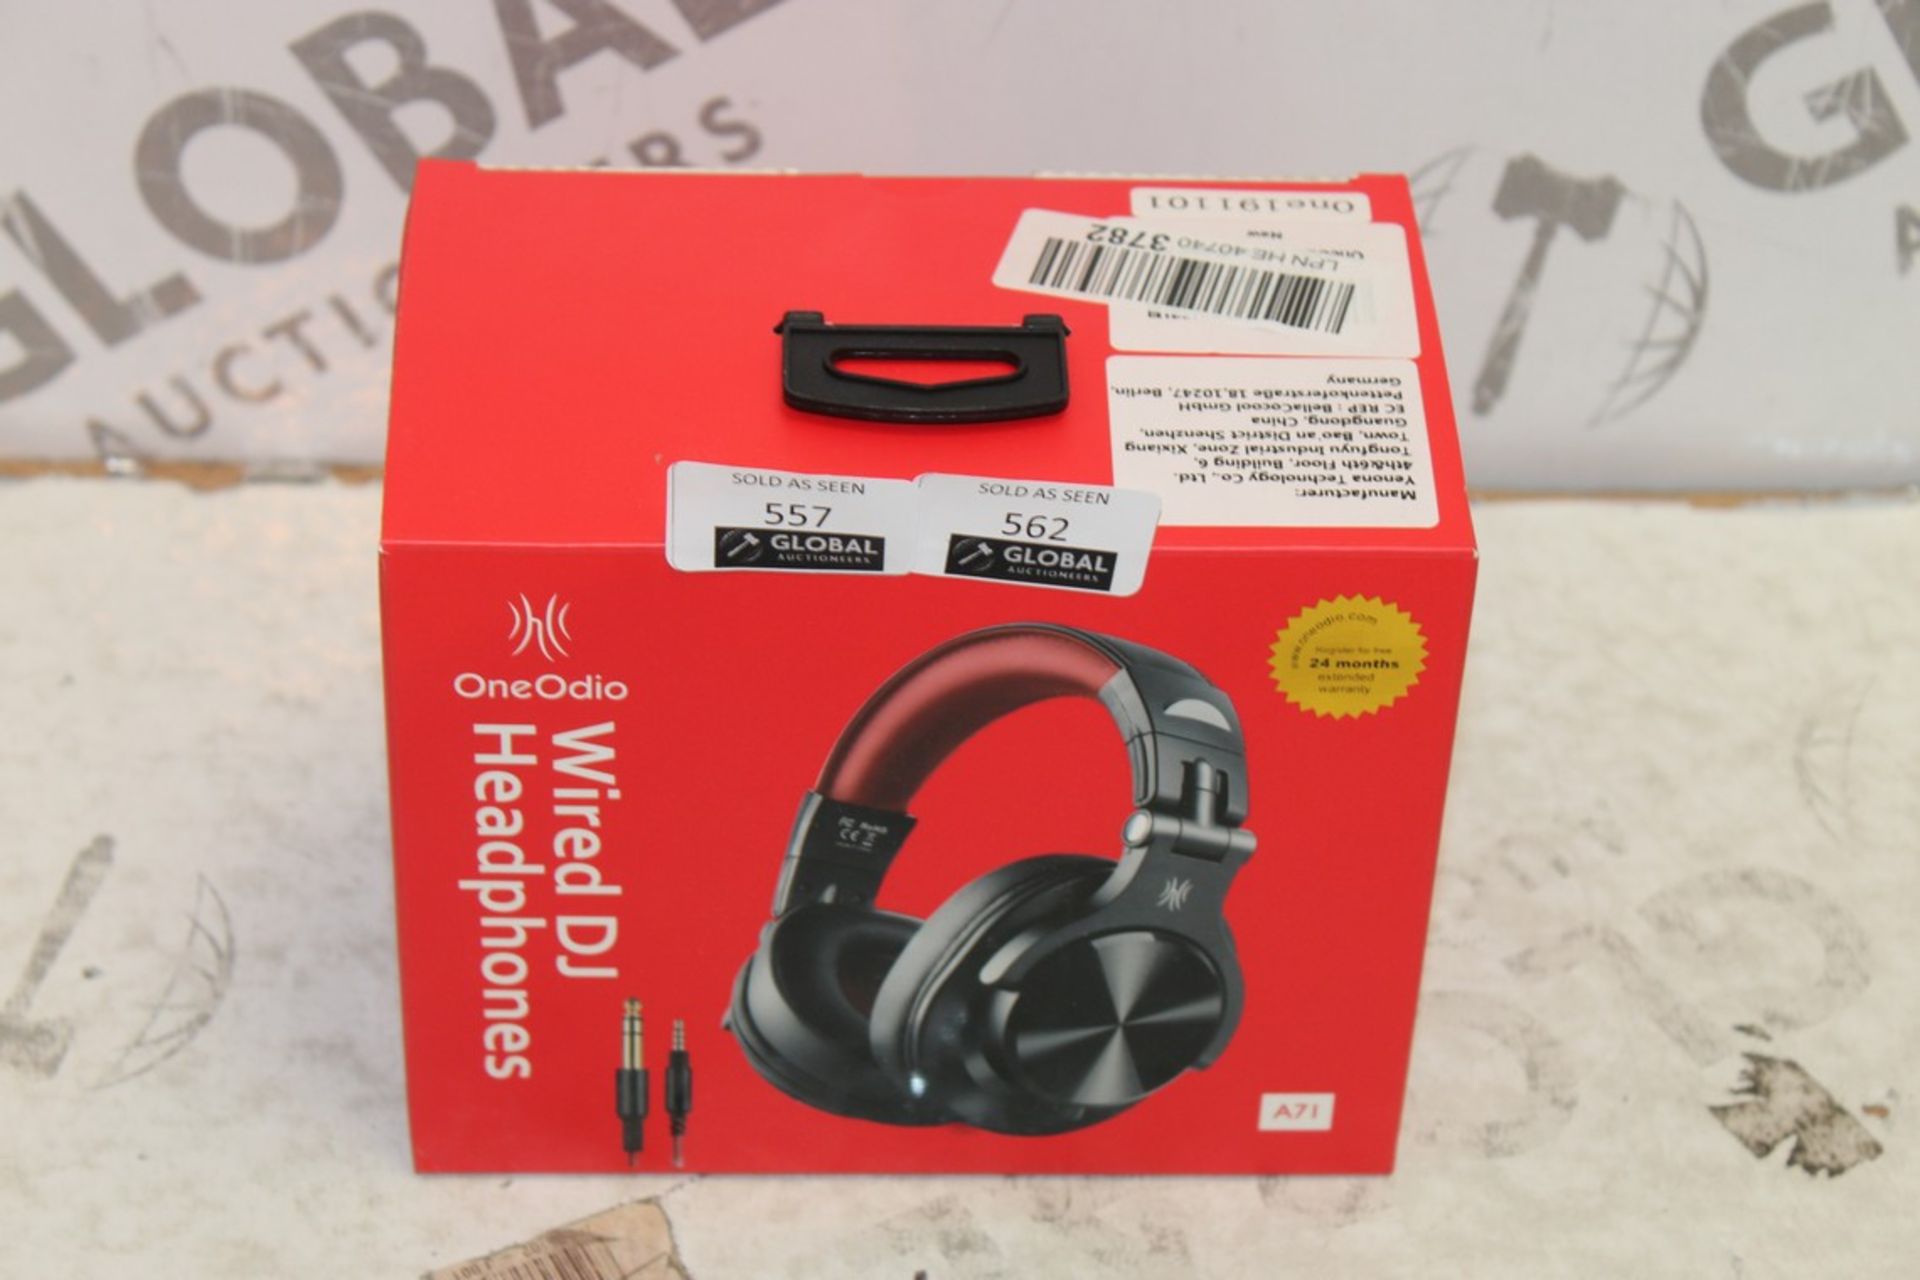 Boxed Brand New Pair One Audio A71 Wired DJ Headphones in Black & Red RRP £45